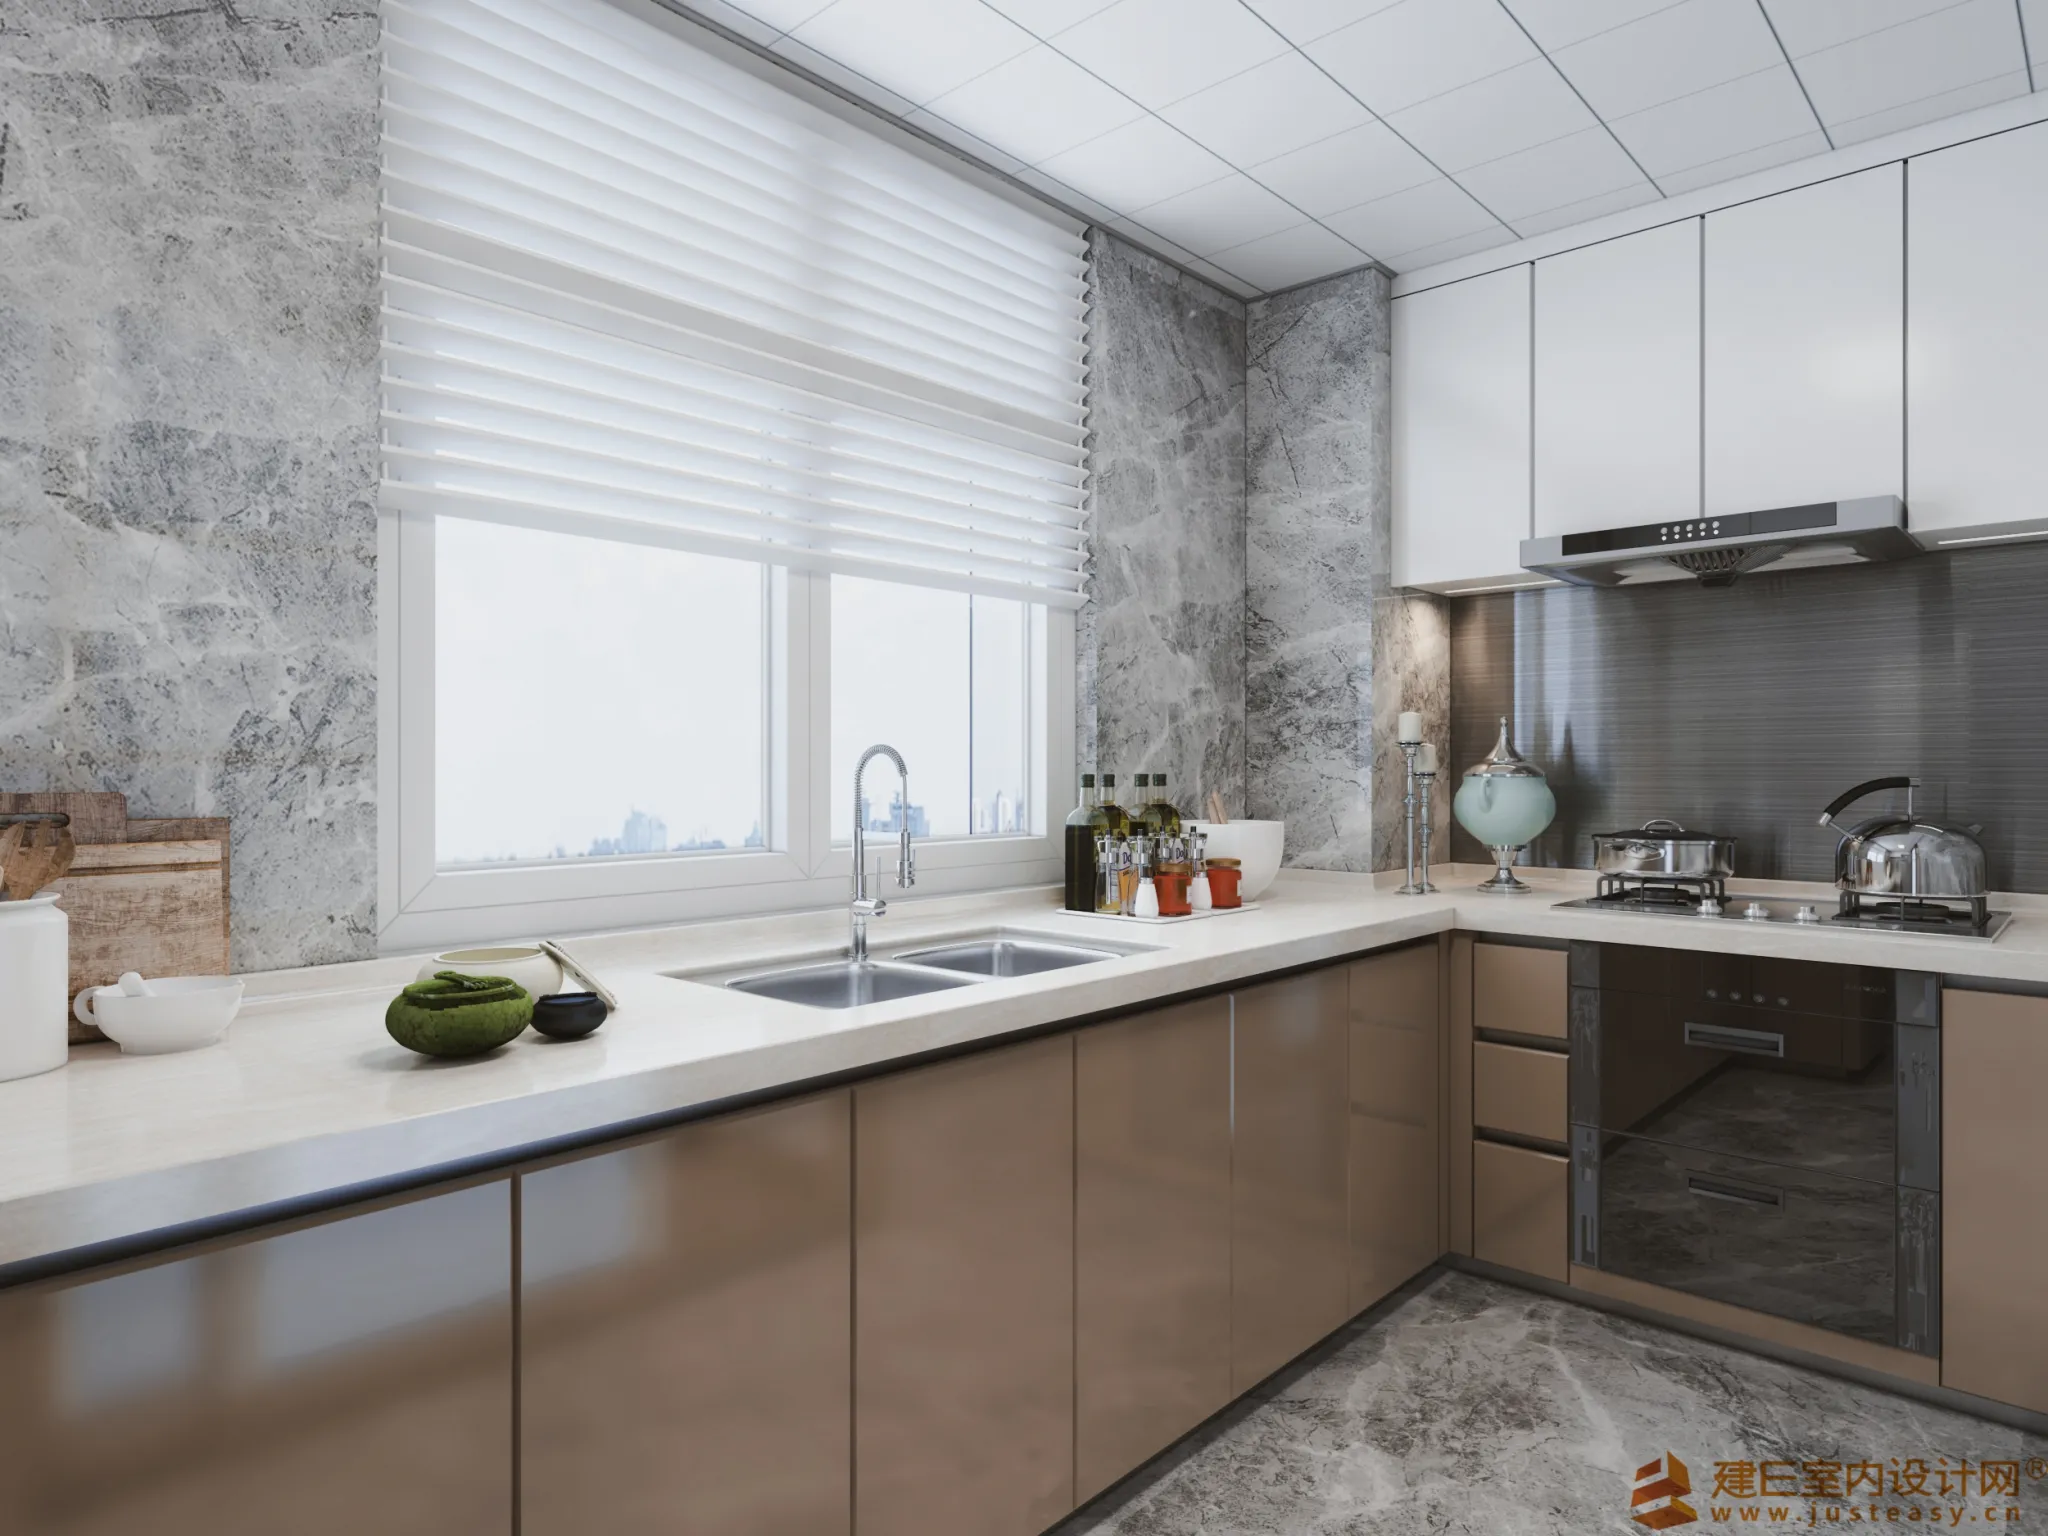 Justeasy 20 – House Space – 02 – KITCHEN – M24